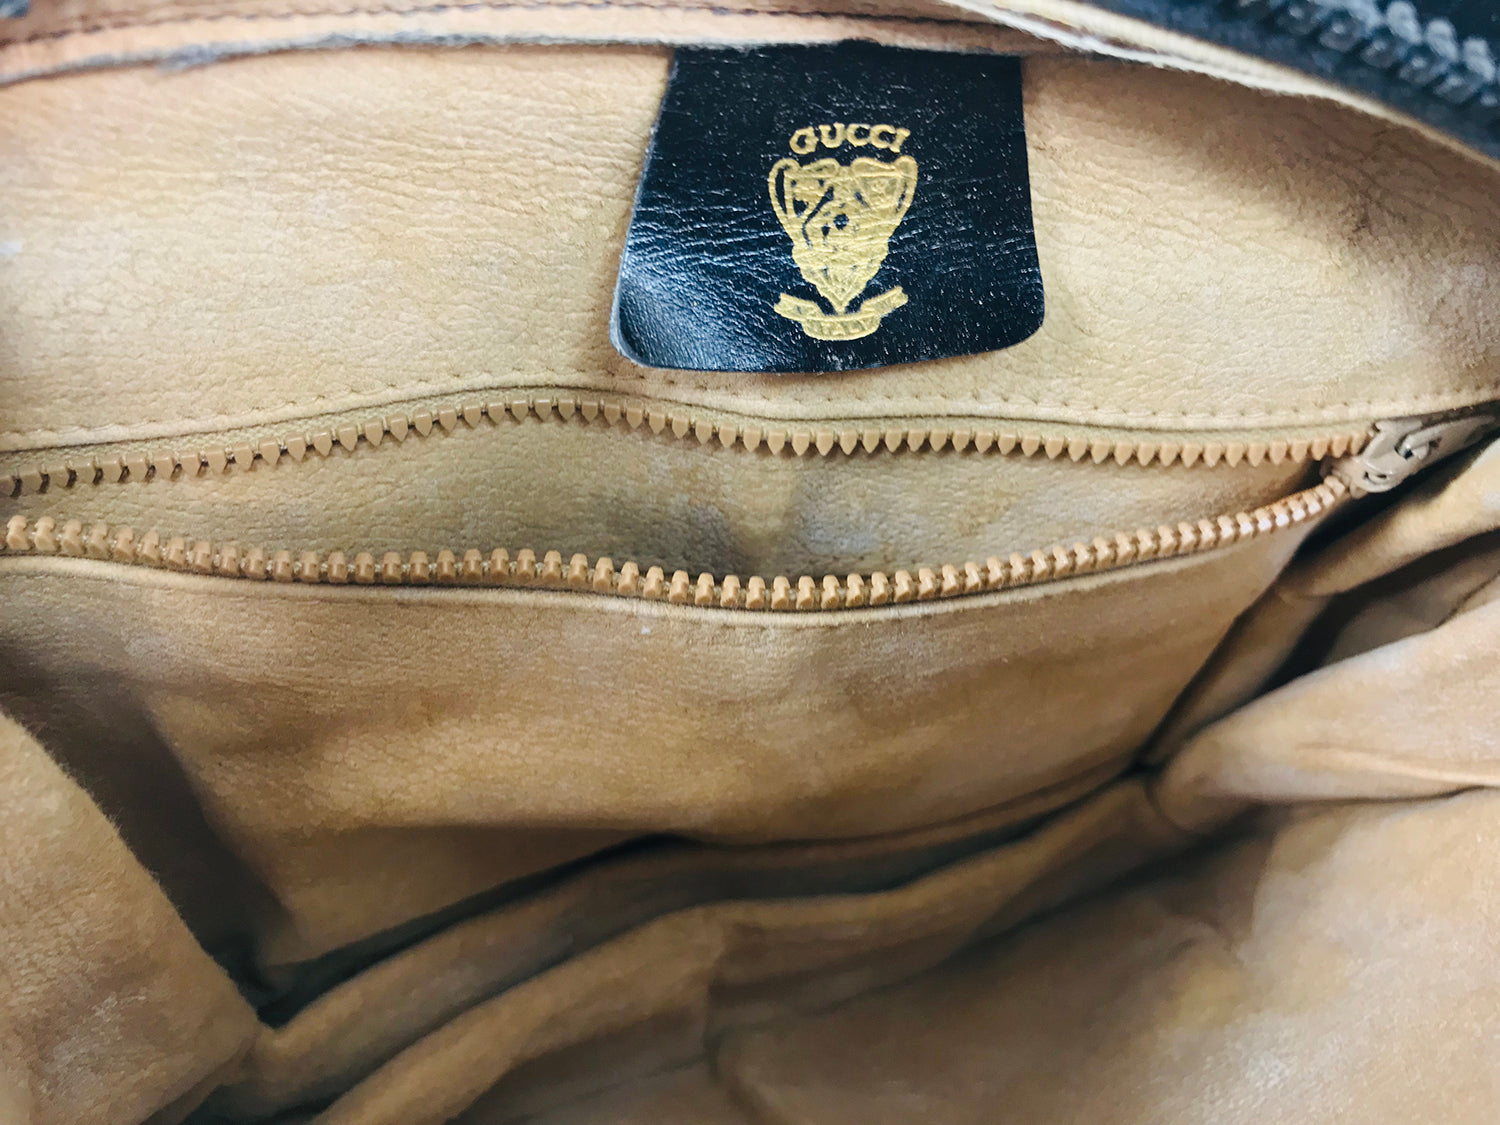 Vintage Gucci Purse Serial Numbers For Sale